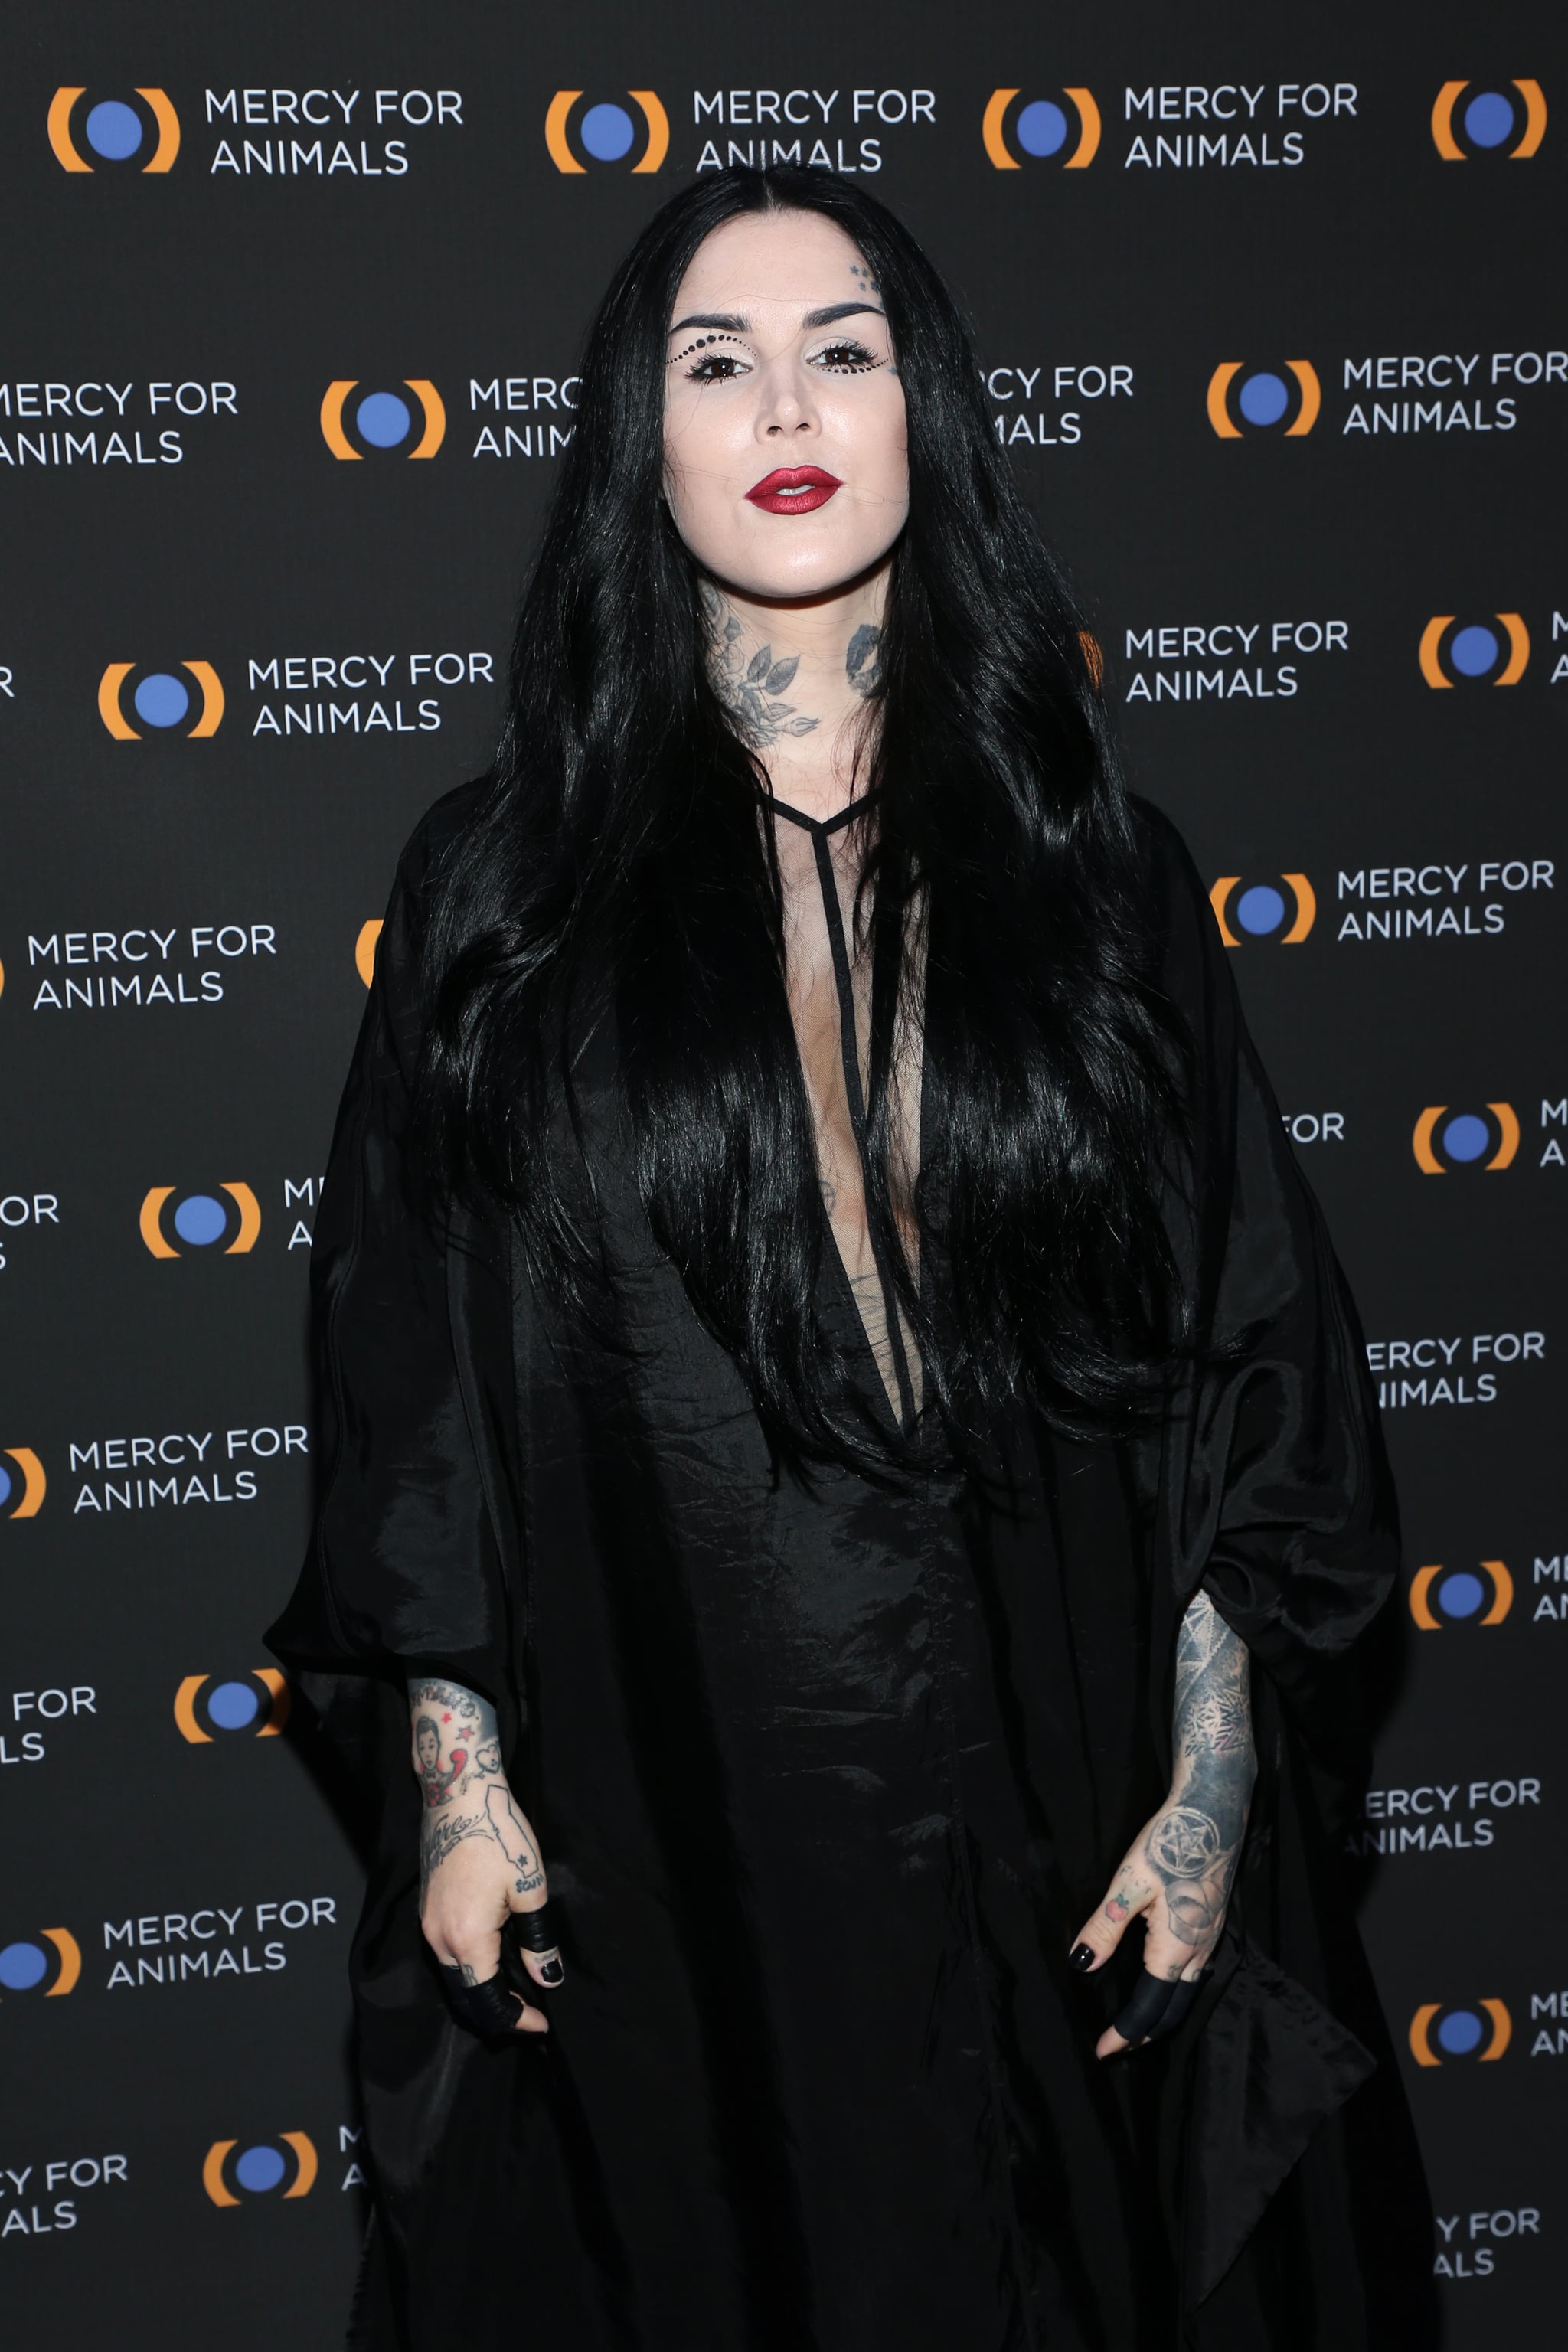 LOS ANGELES, CALIFORNIA - SEPTEMBER 14: Kat Von D attends the Mercy For Animals 20th Anniversary Gala at The Shrine Auditorium on September 14, 2019 in Los Angeles, California. (Photo by Phillip Faraone/FilmMagic)